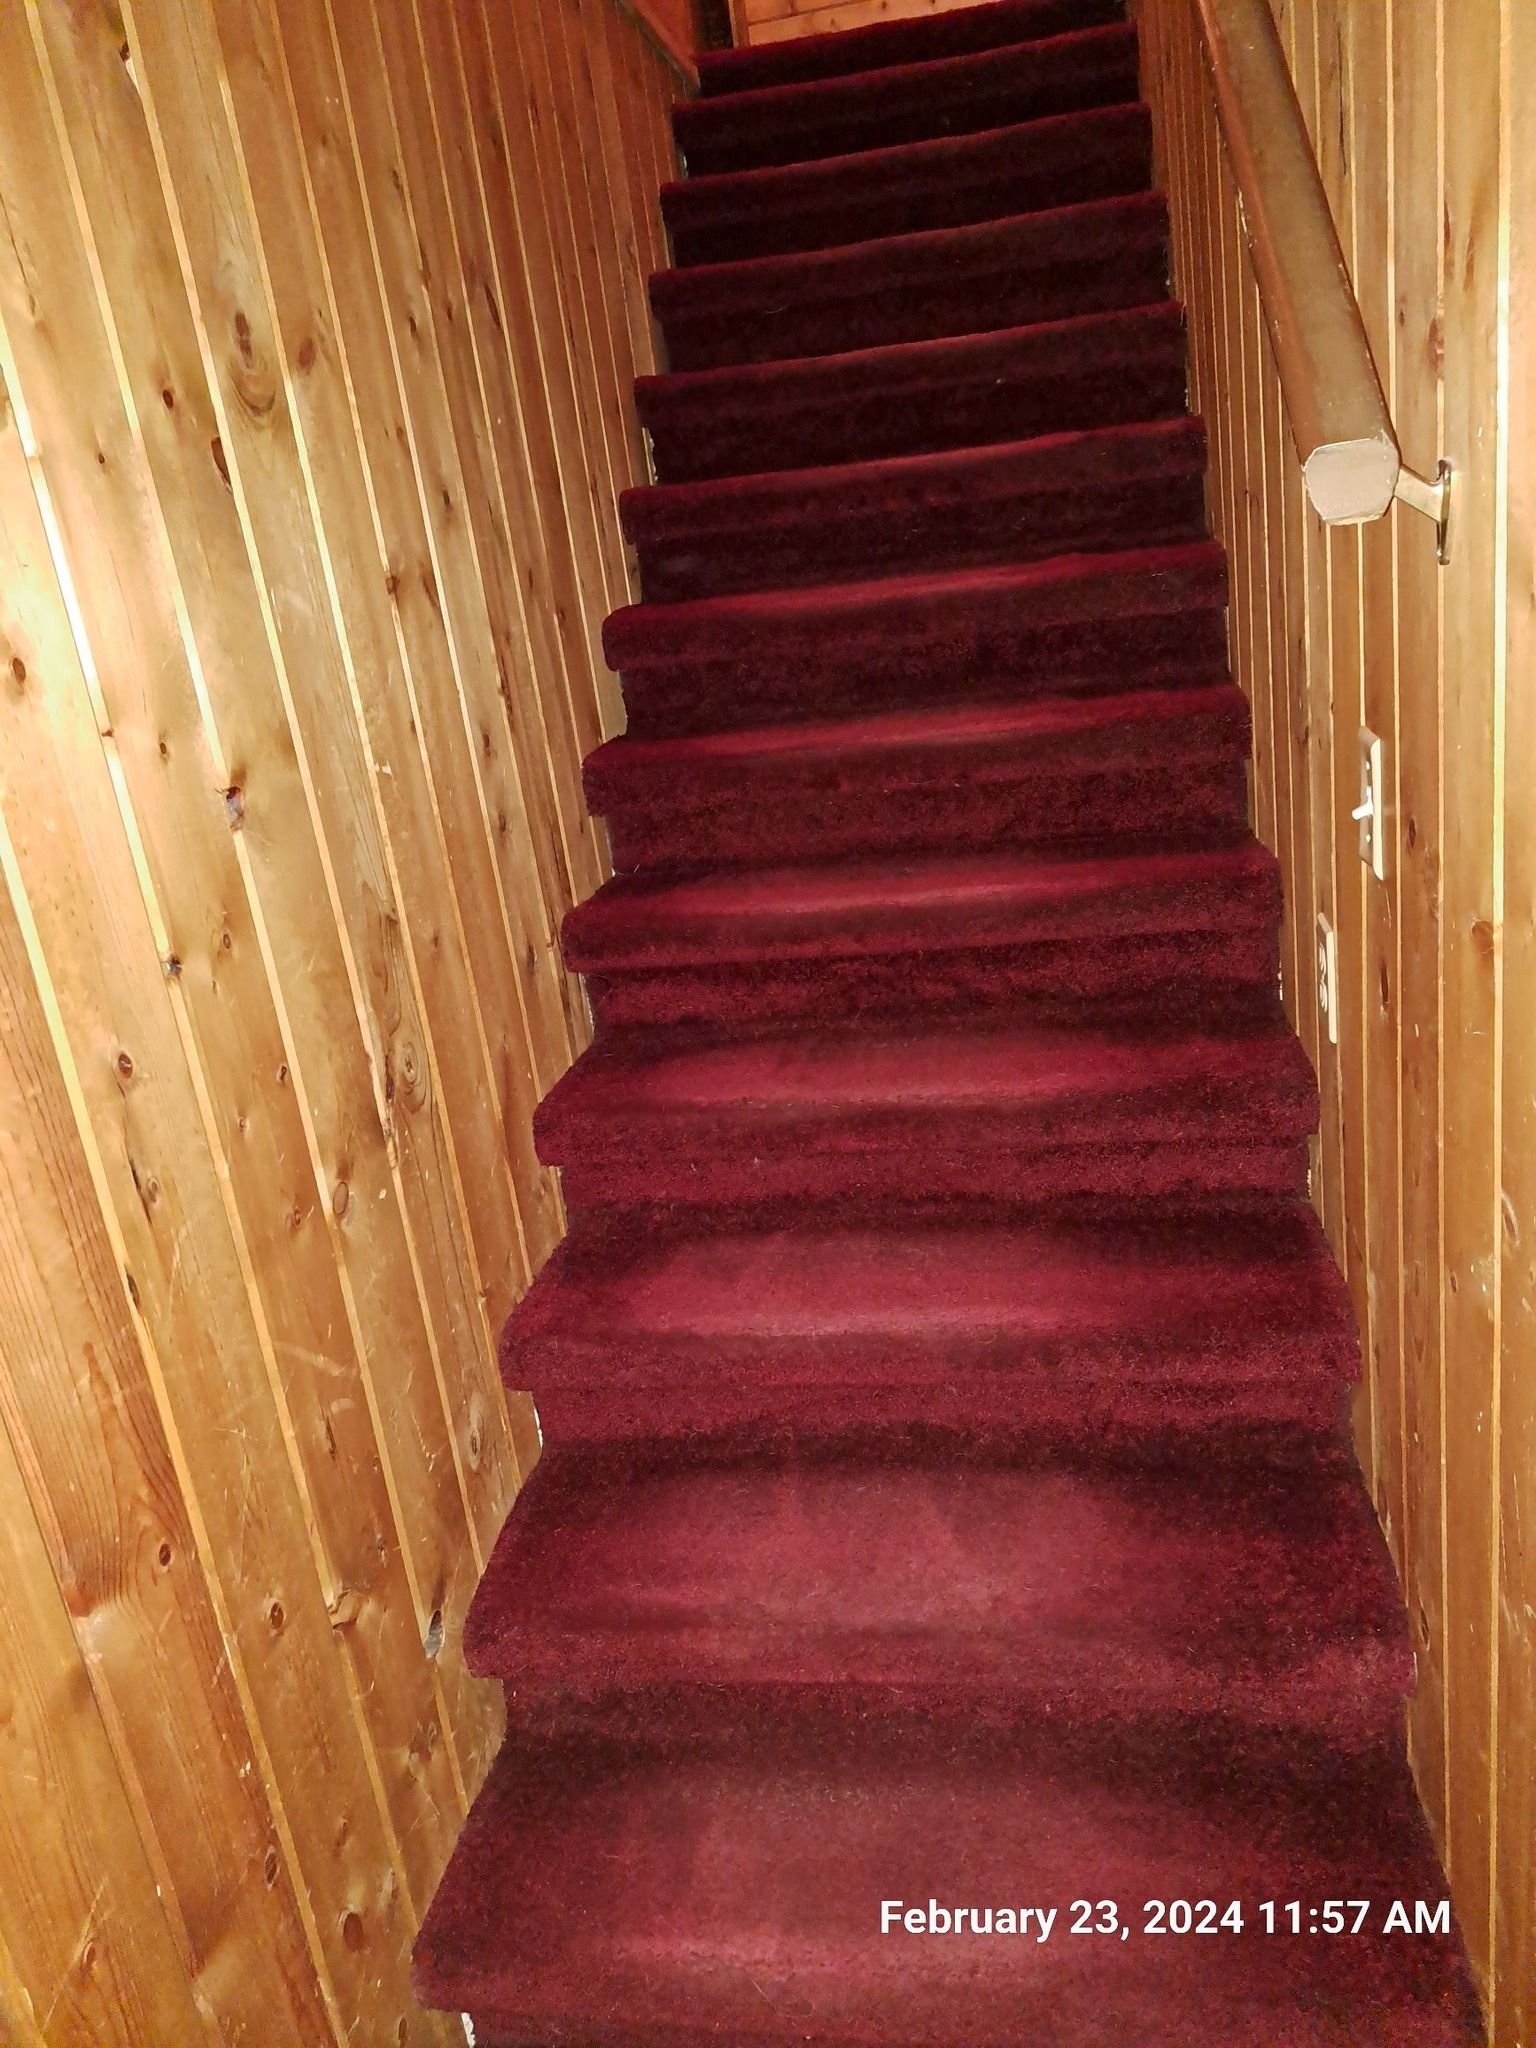 A staircase with red carpet and wooden walls